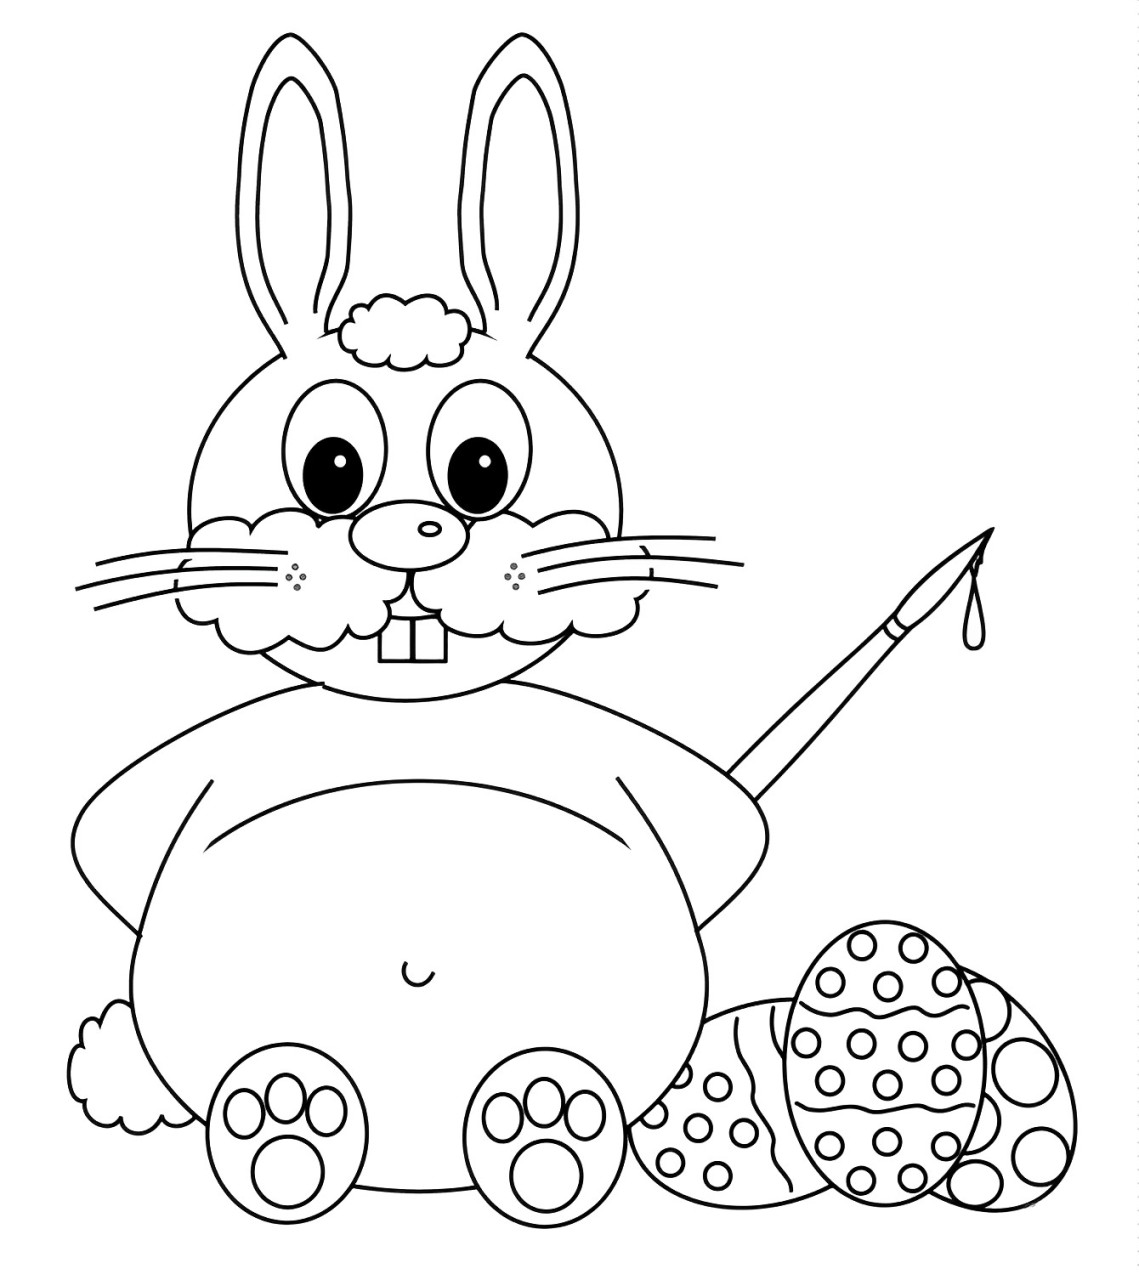 Bunny Coloring Pages Free Online For kids!